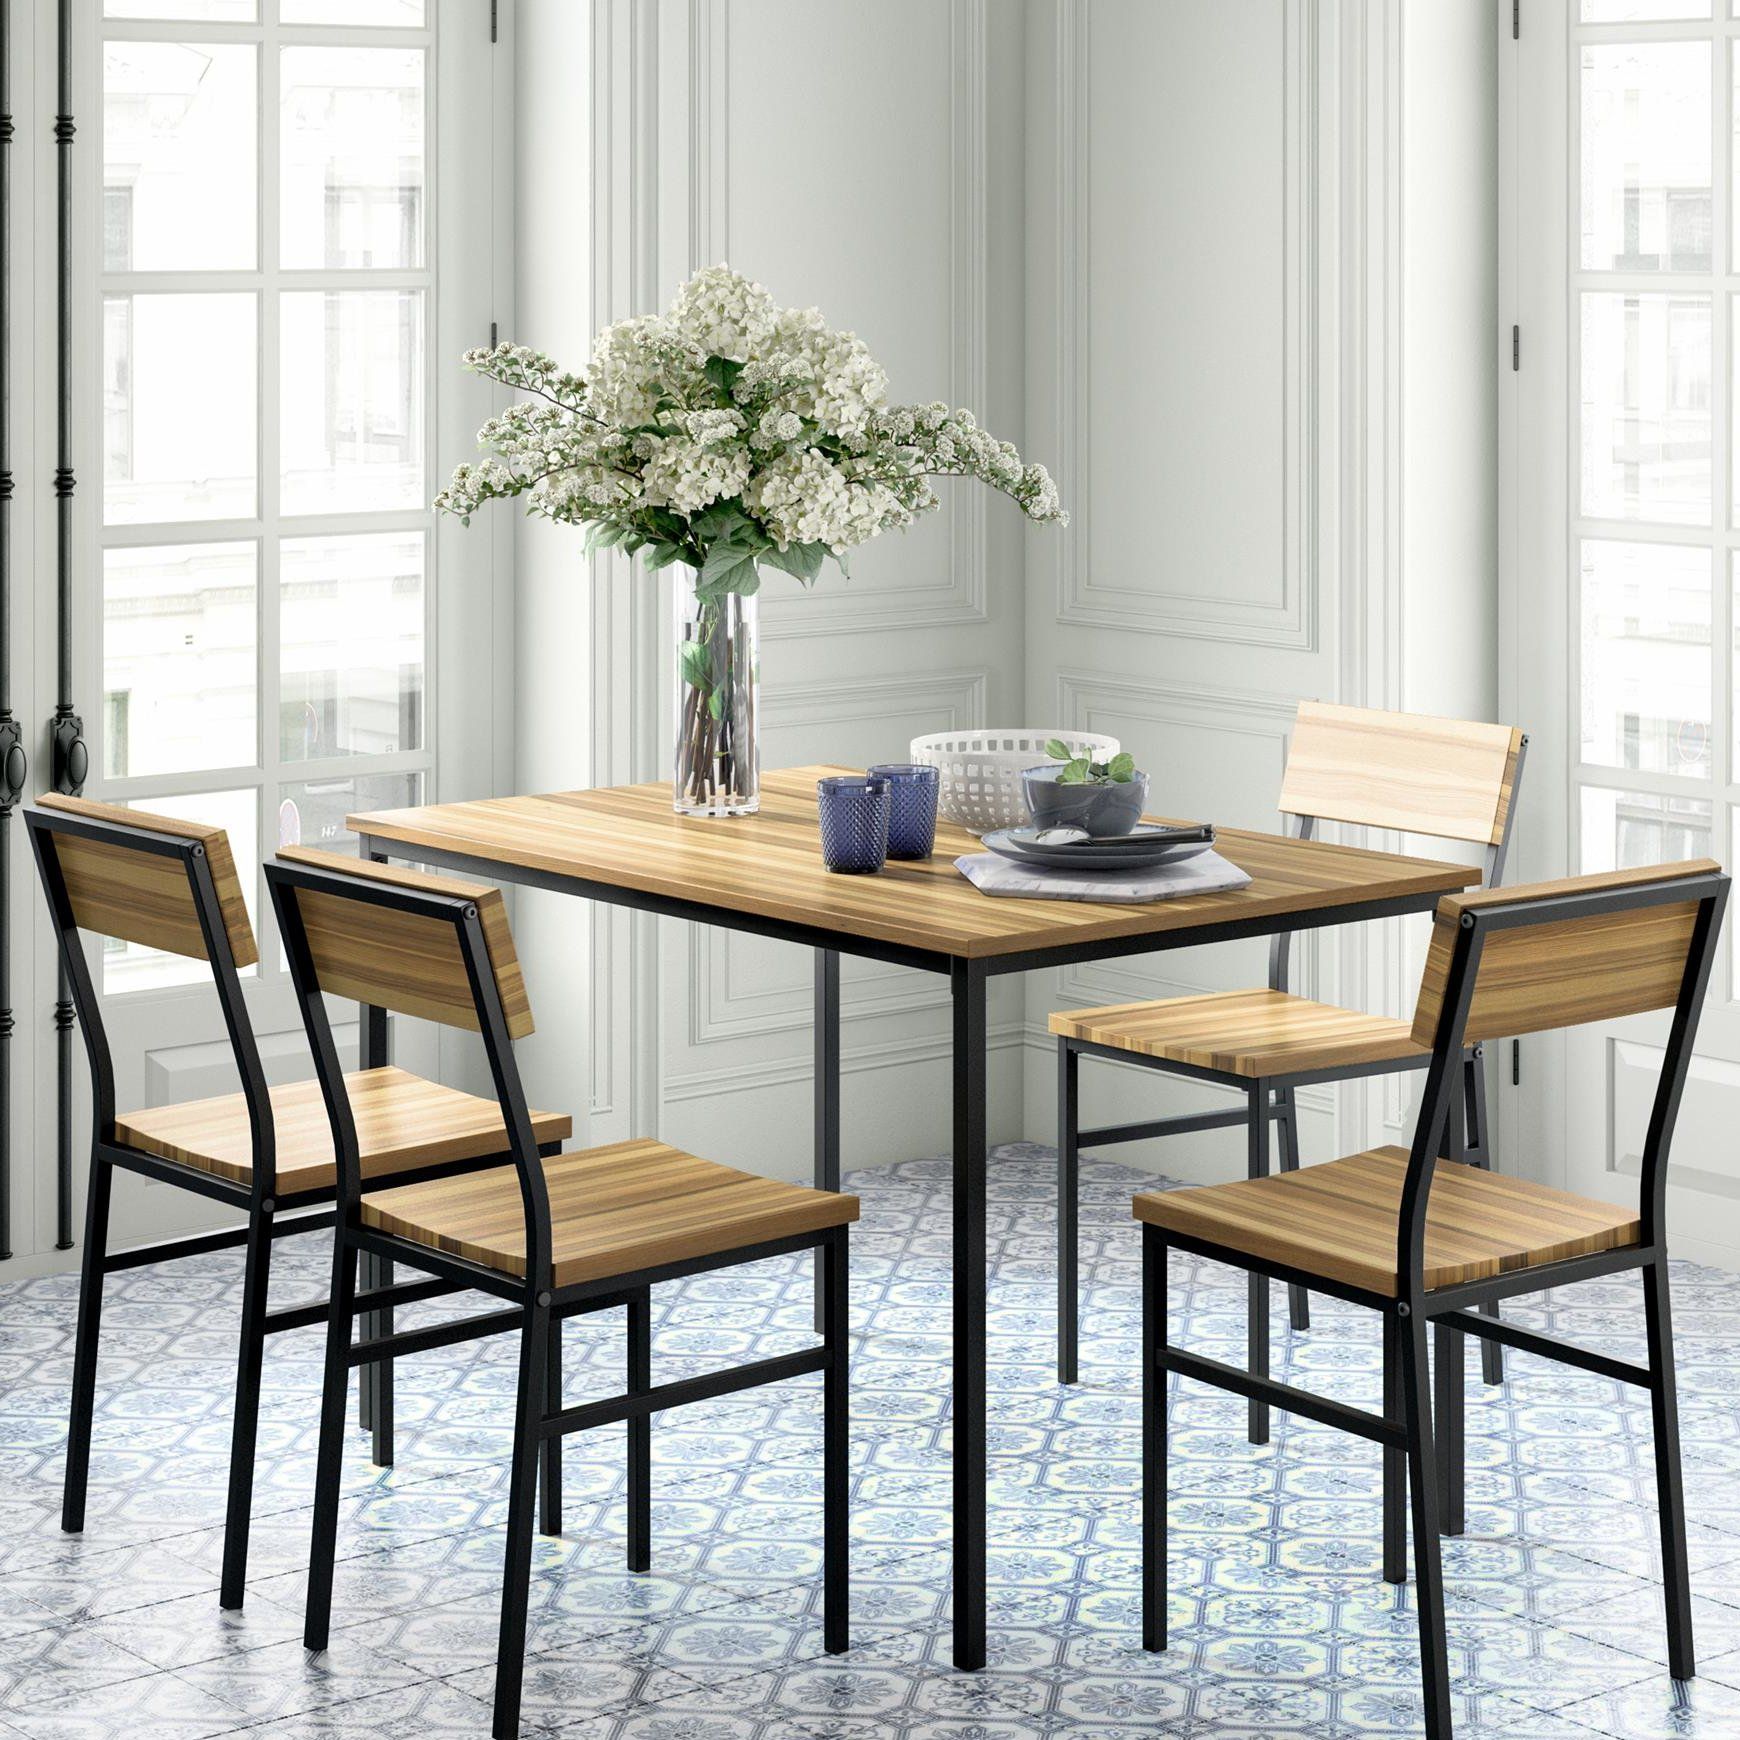 Linden 5 Piece Dining Set Pertaining To Most Recently Released Conover 5 Piece Dining Sets (View 2 of 20)